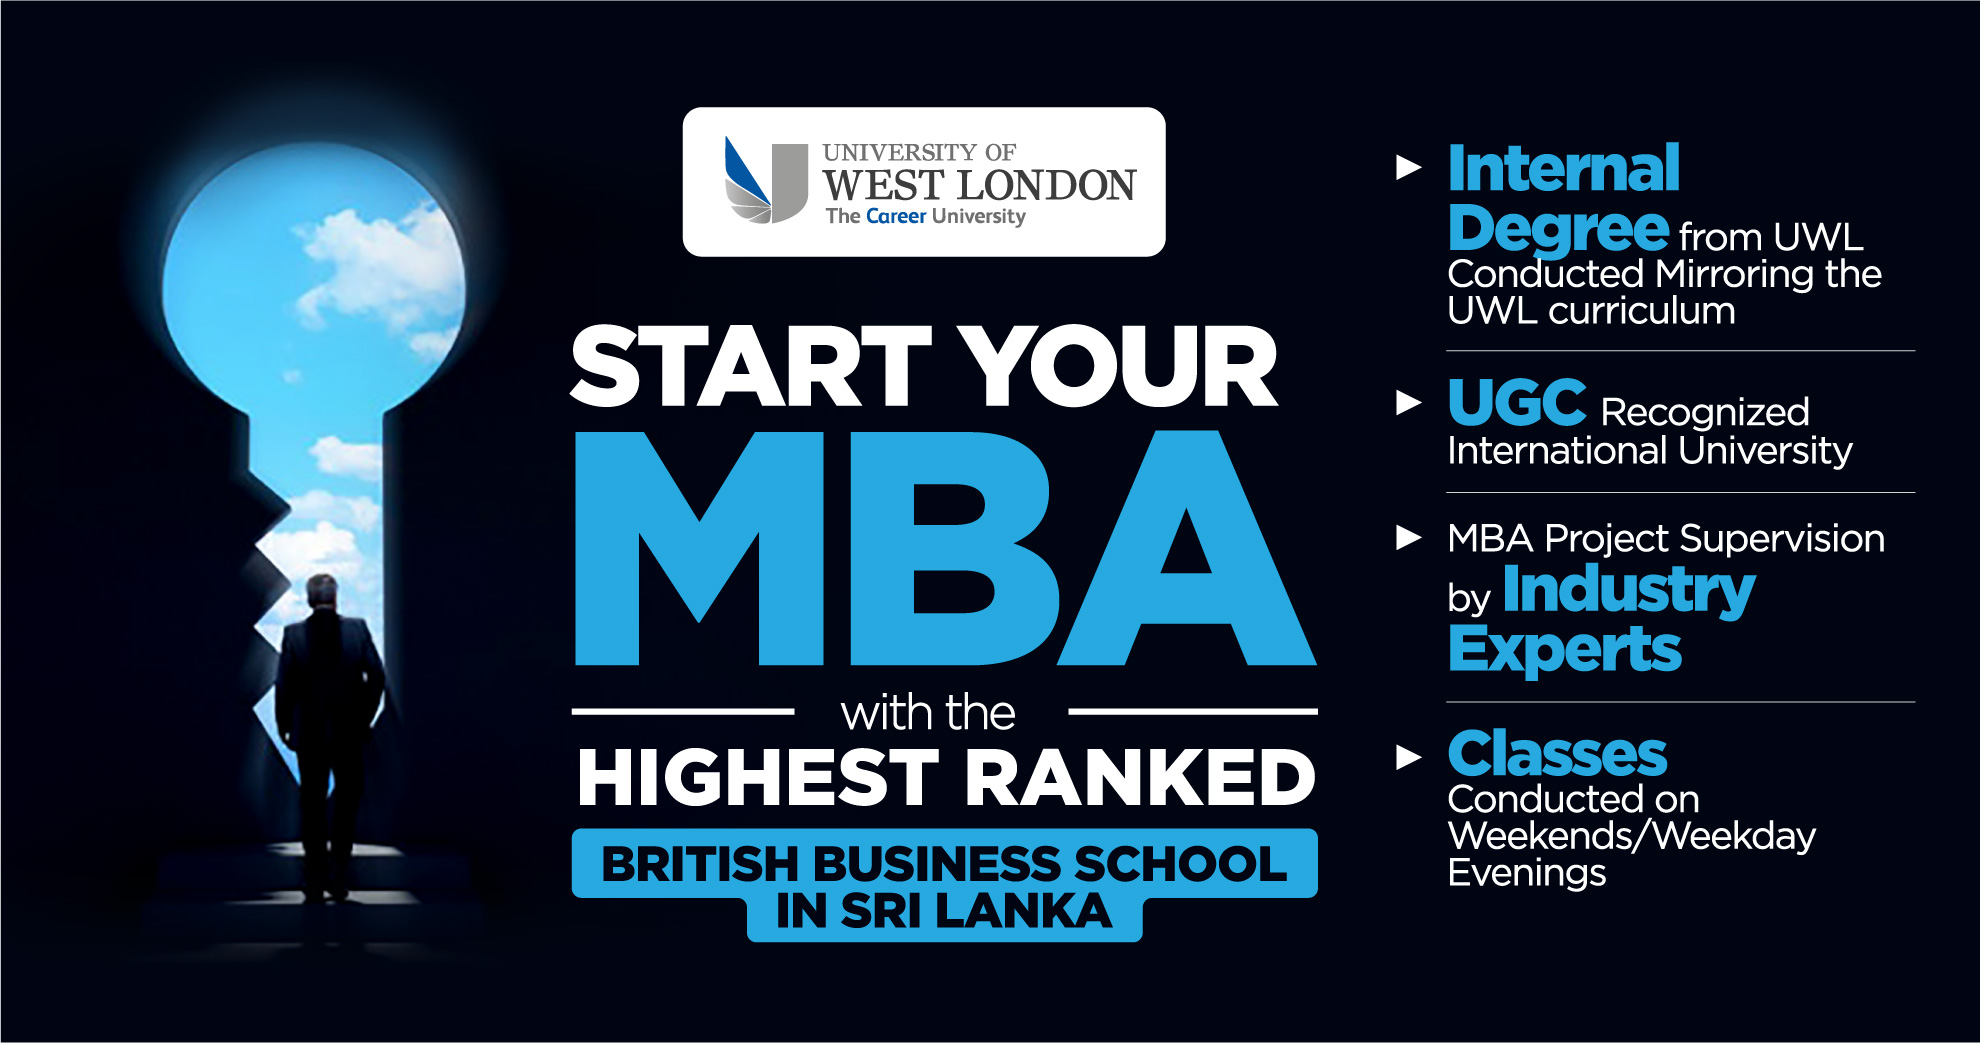 start your MBA with the highest ranked British business school in Sri Lanka